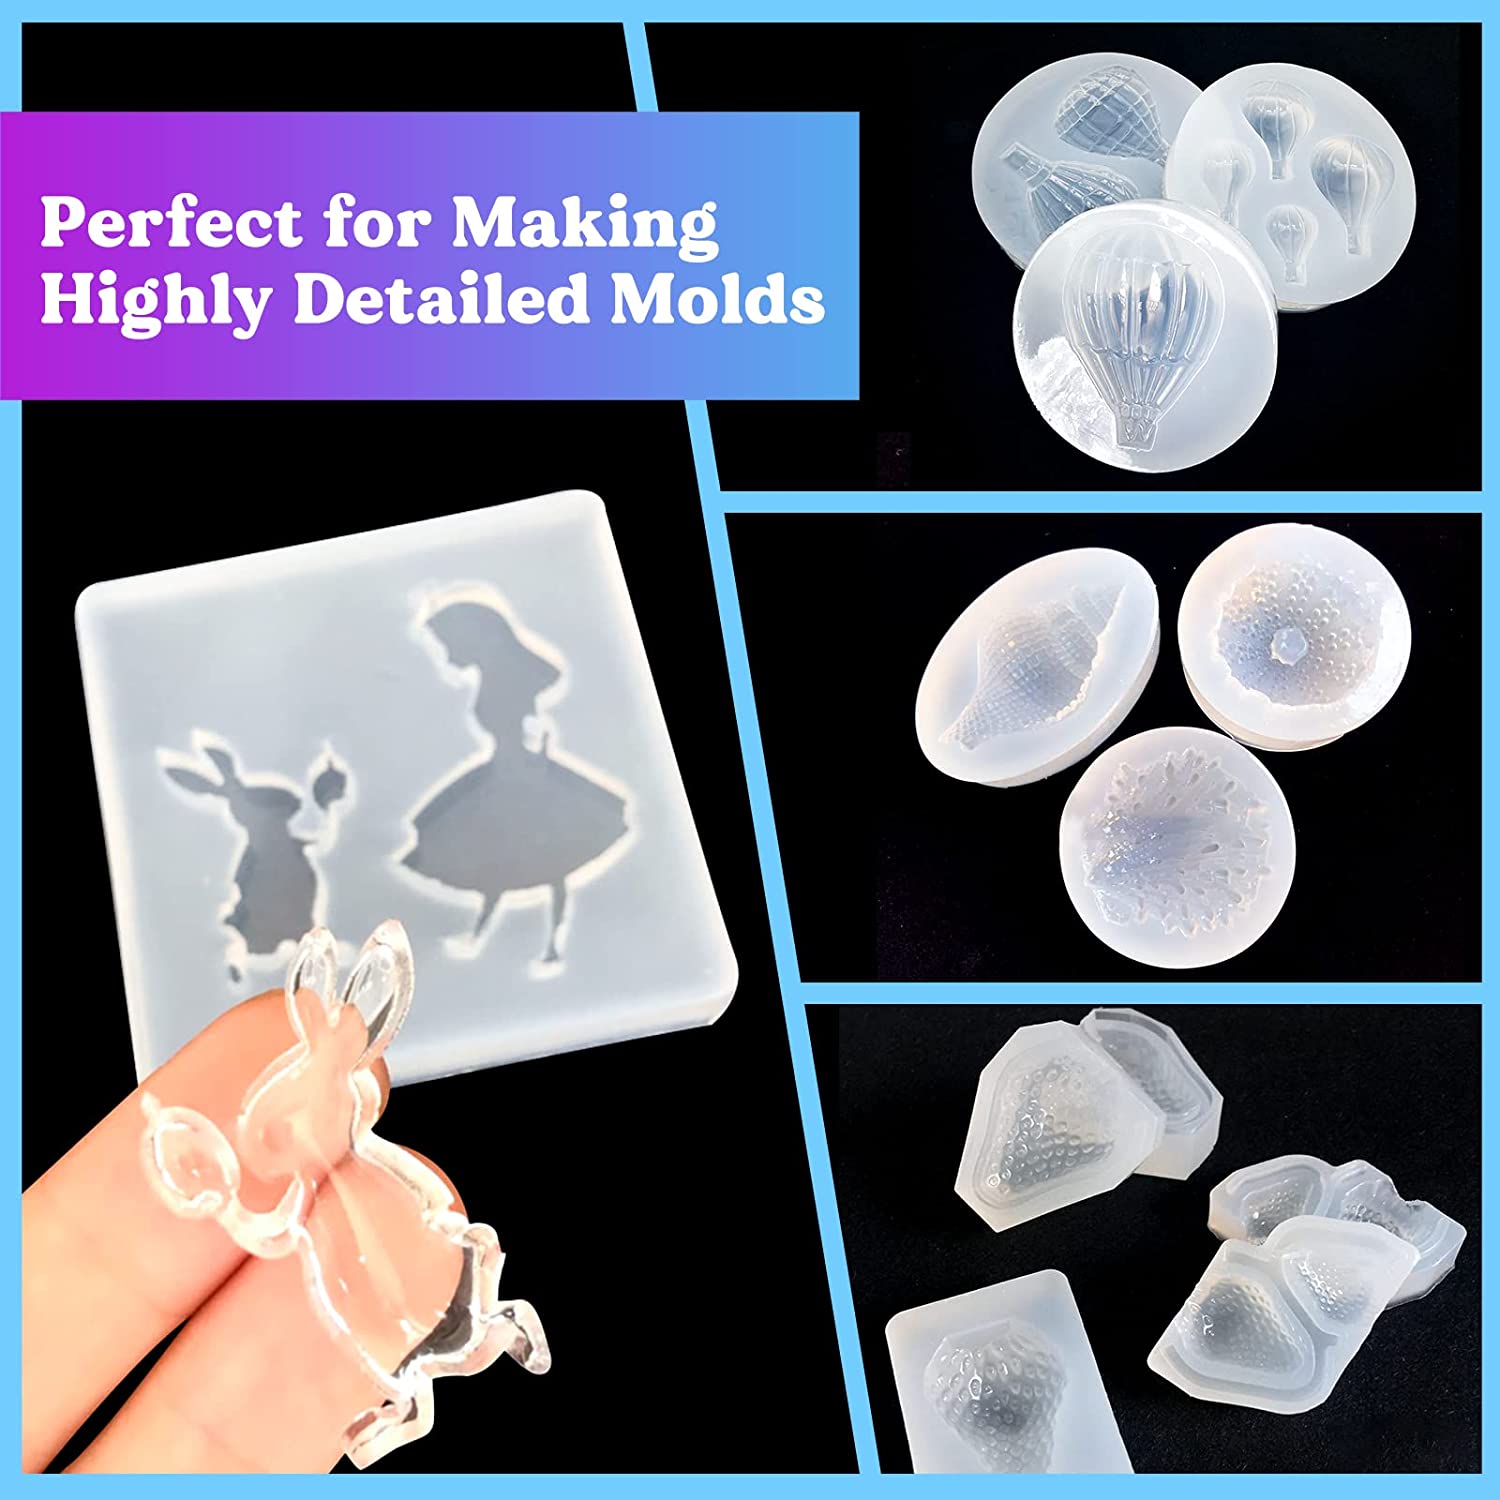 LET'S RESIN Silicone Mold Making Kit 63.48oz/3.968lbs,Non-Toxic Mold Making  Silicone Rubber, Platinum Silicone Mold Maker,Clear Liquid Molding Silicone  Kit for Resin Molds, Silicone Molds Making